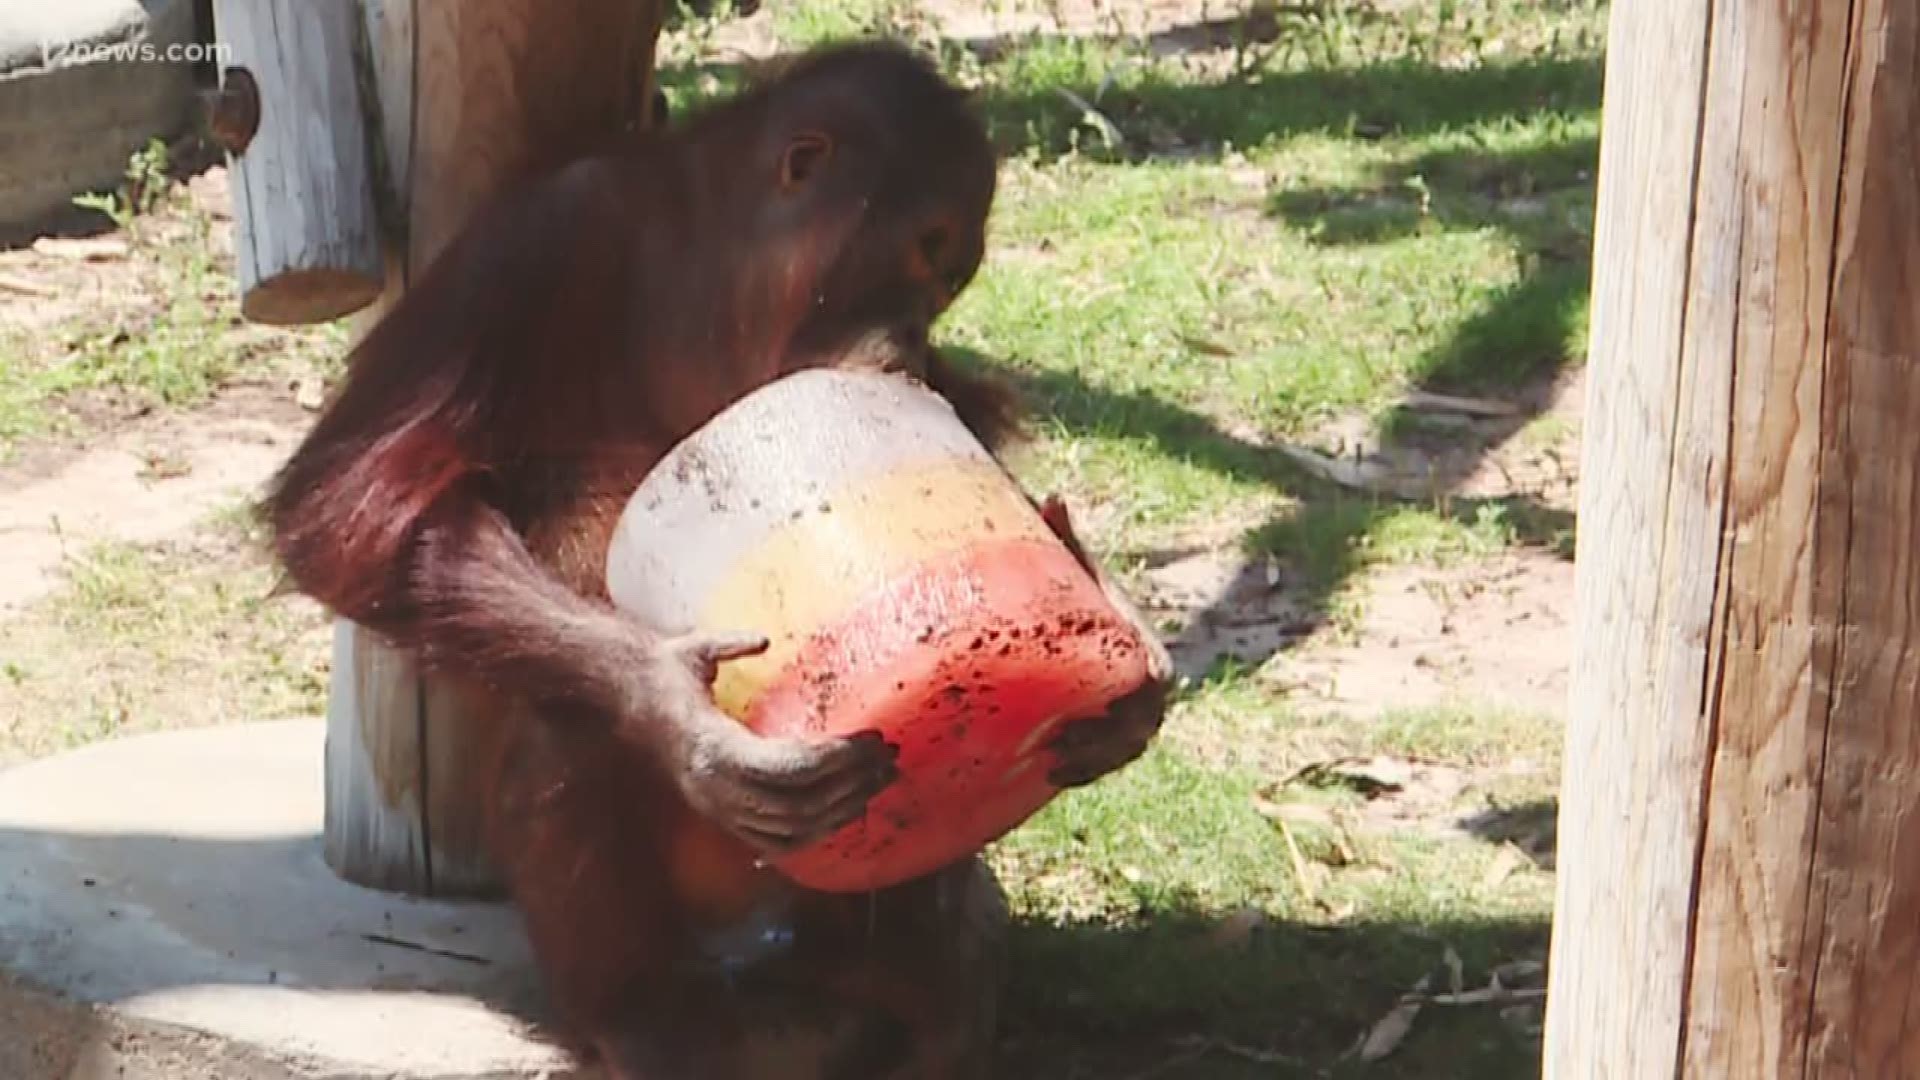 The animals get special treats and showers to stay cool in the heat.